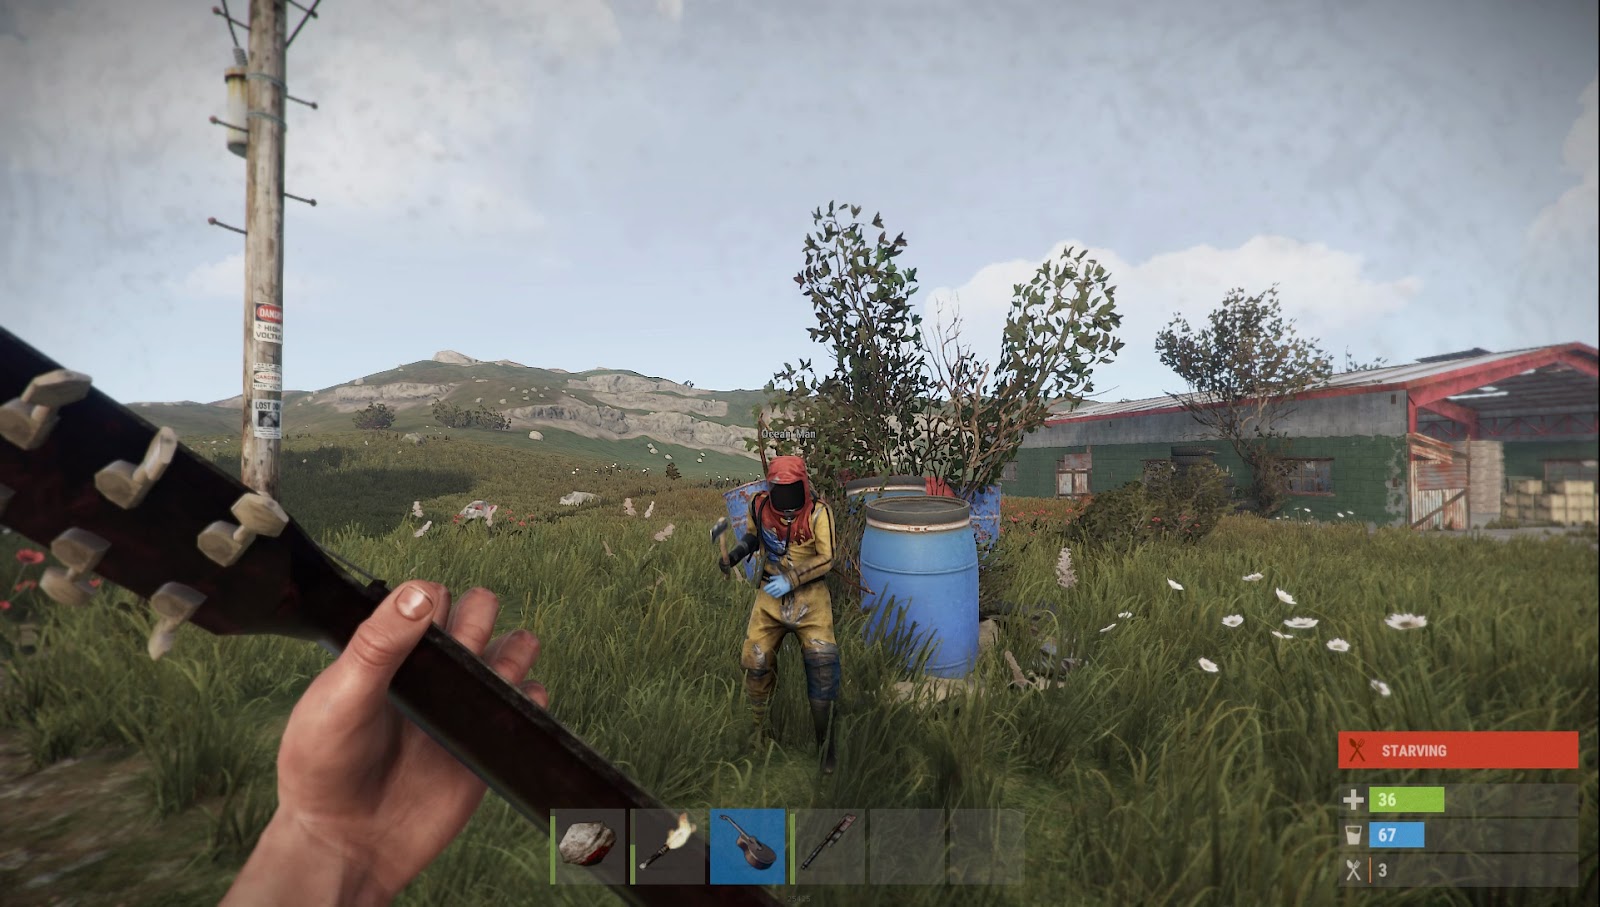 Surviving and competing against much stronger players is quite common in Rust